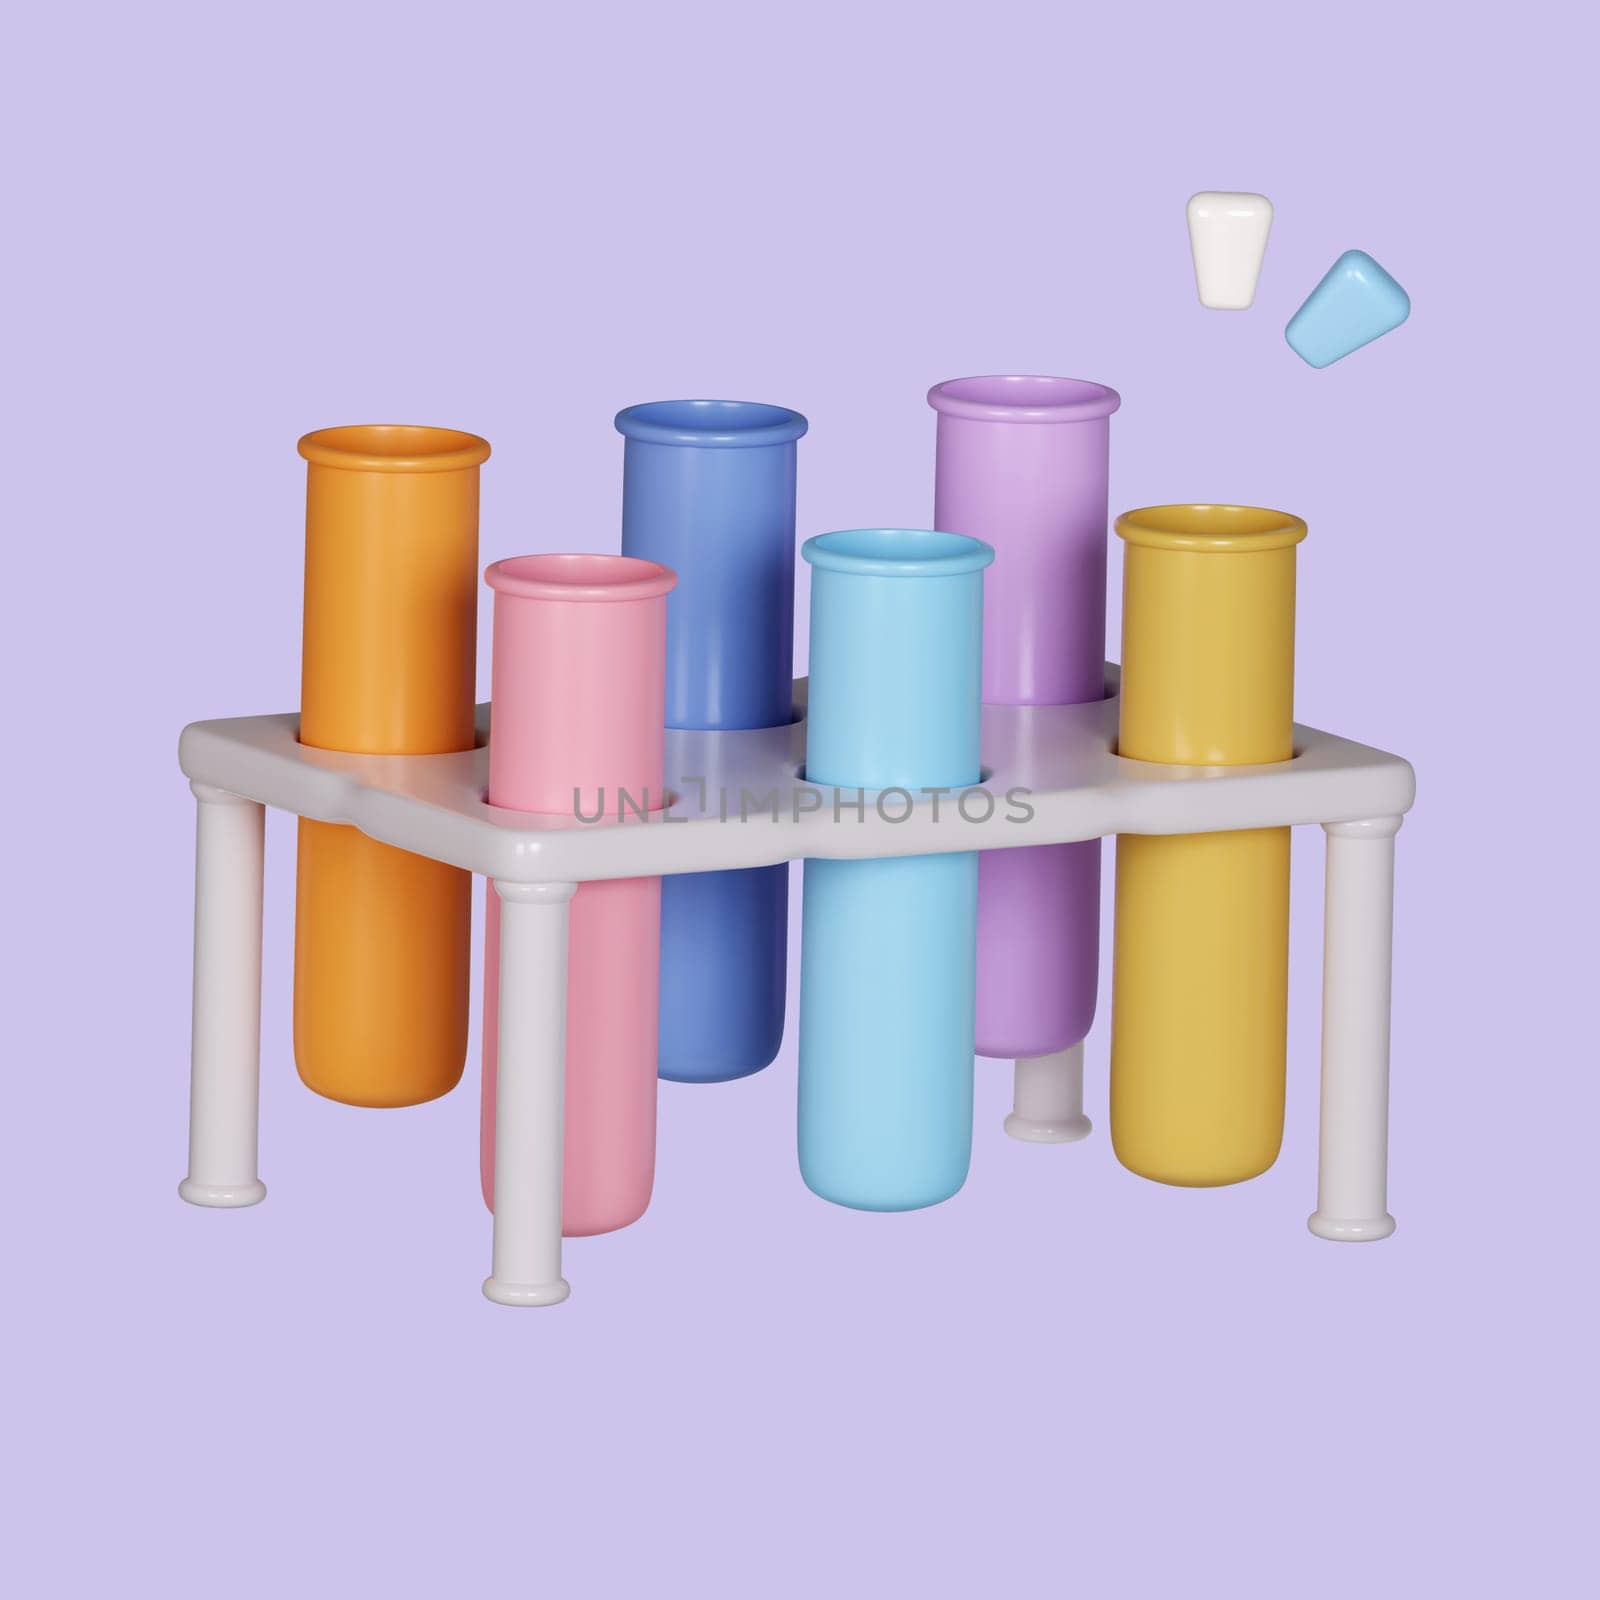 Cartoon conical beaker chemistry isolated on background. icon symbol clipping path. 3d render illustration by meepiangraphic